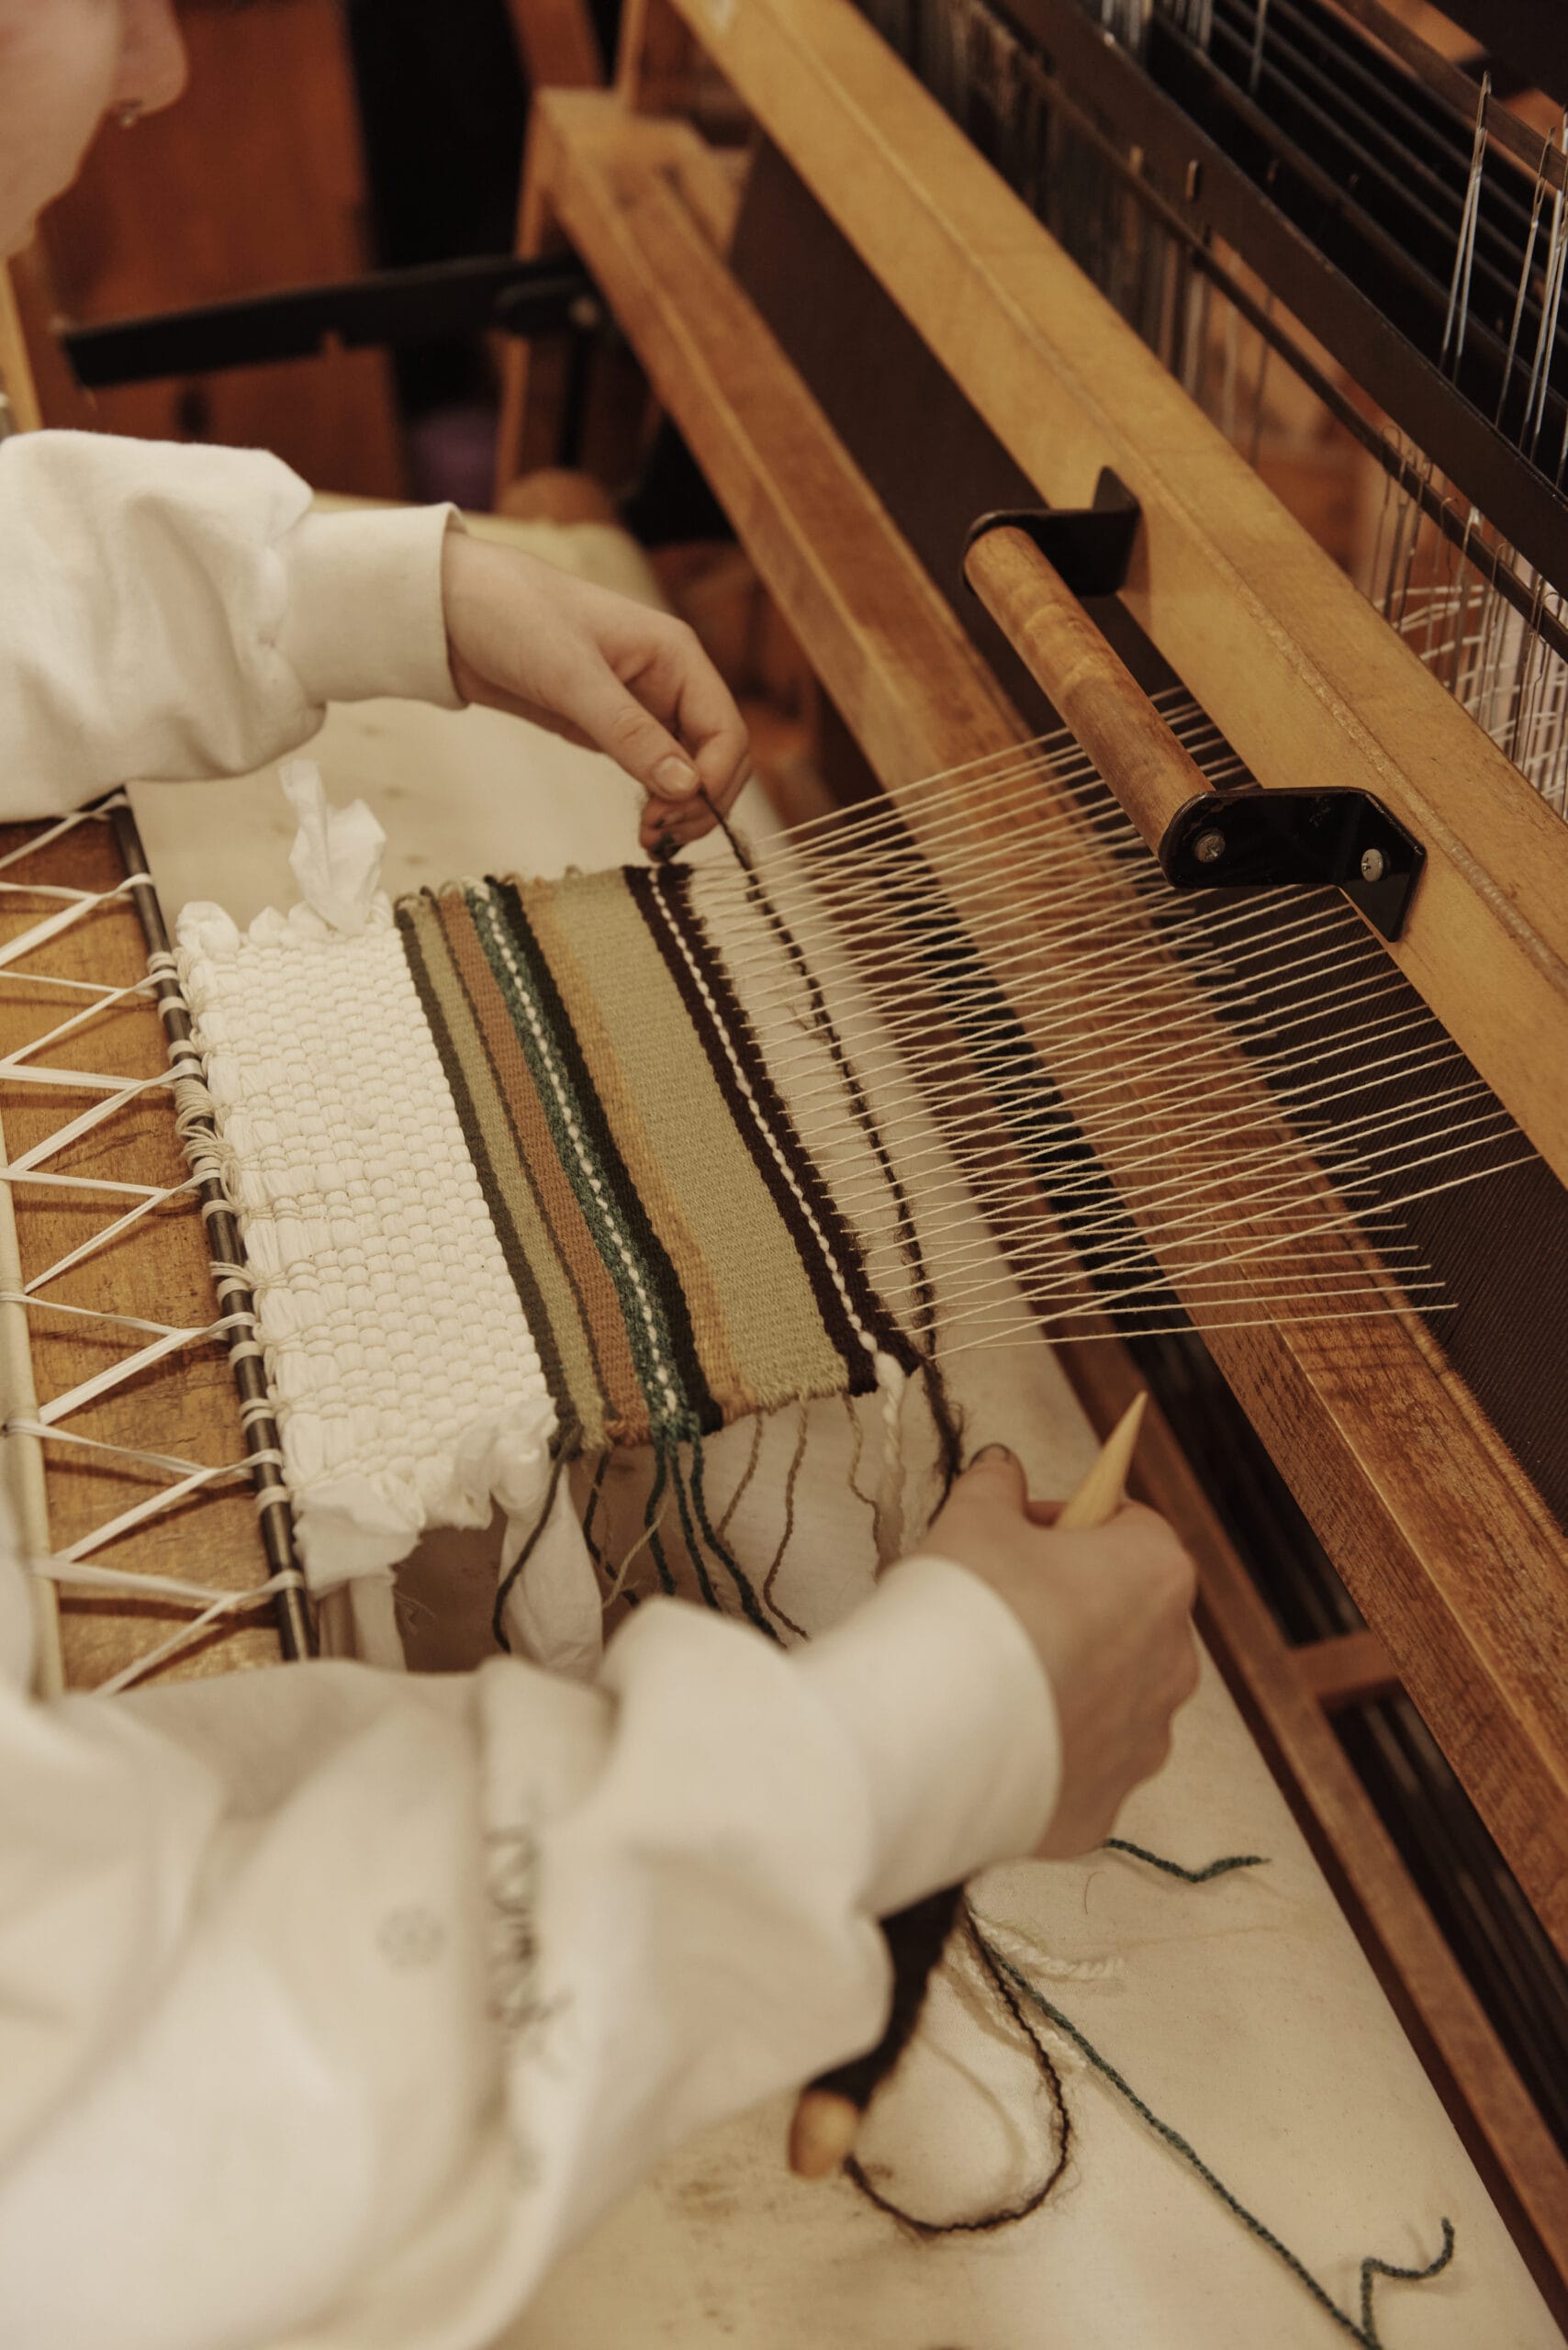 A student's hands weaving on a loom